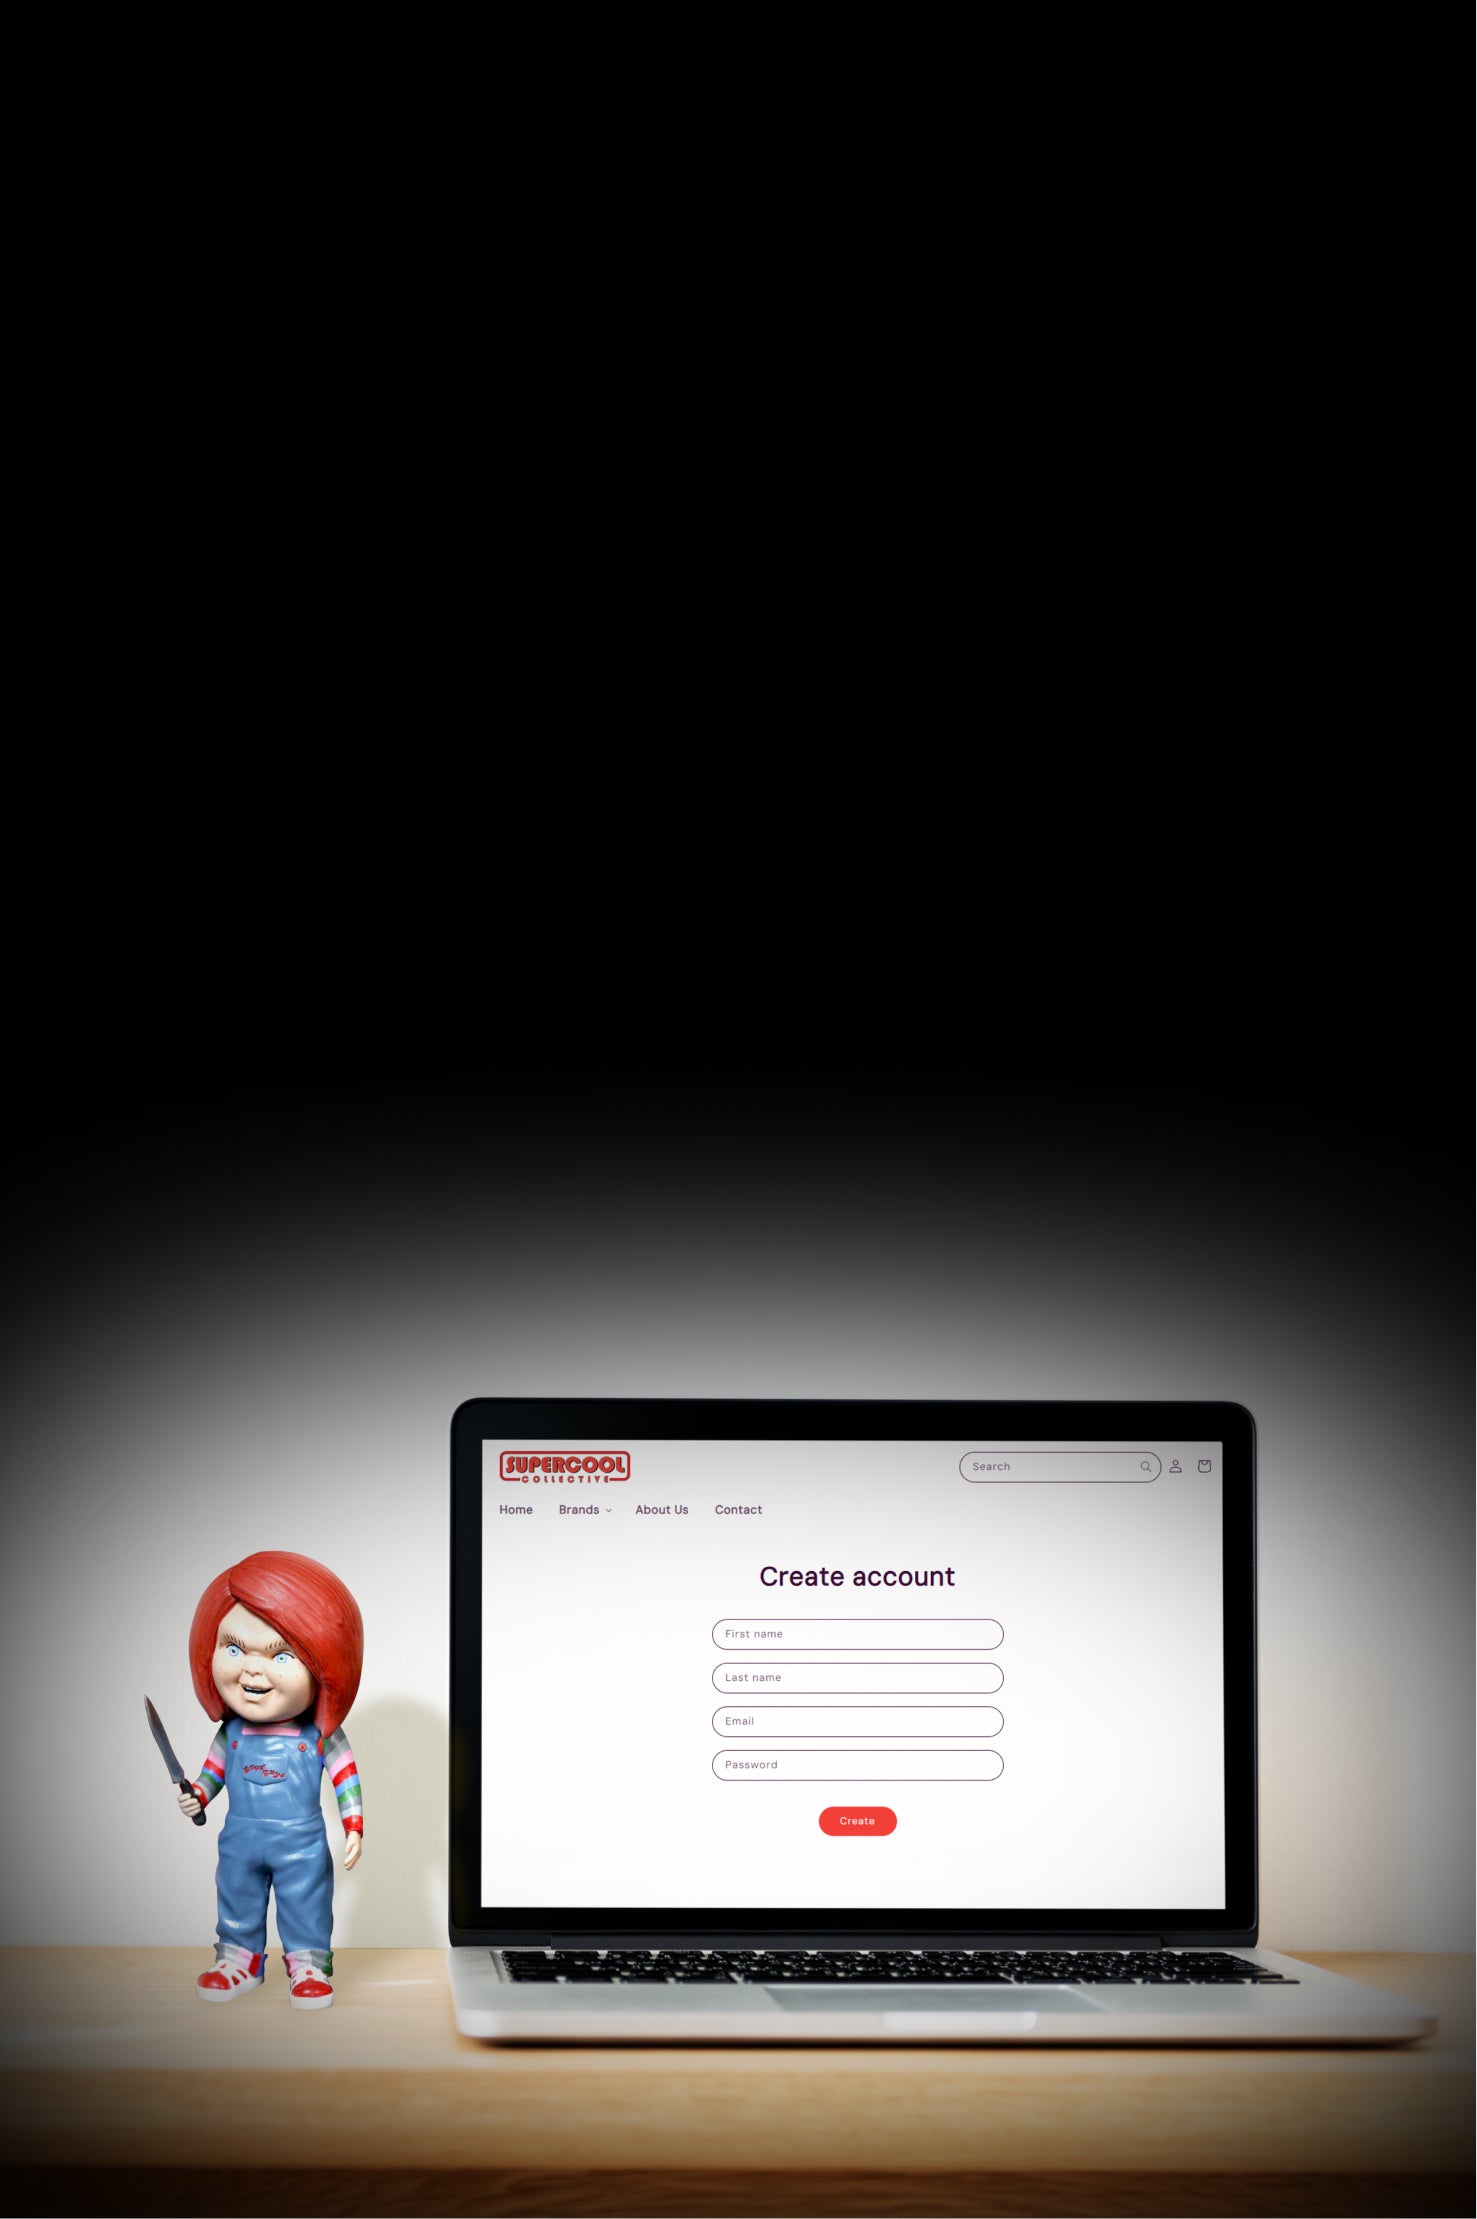 Laptop displaying a 'create account' page, with a Chucky figure holding a knife on a desk.